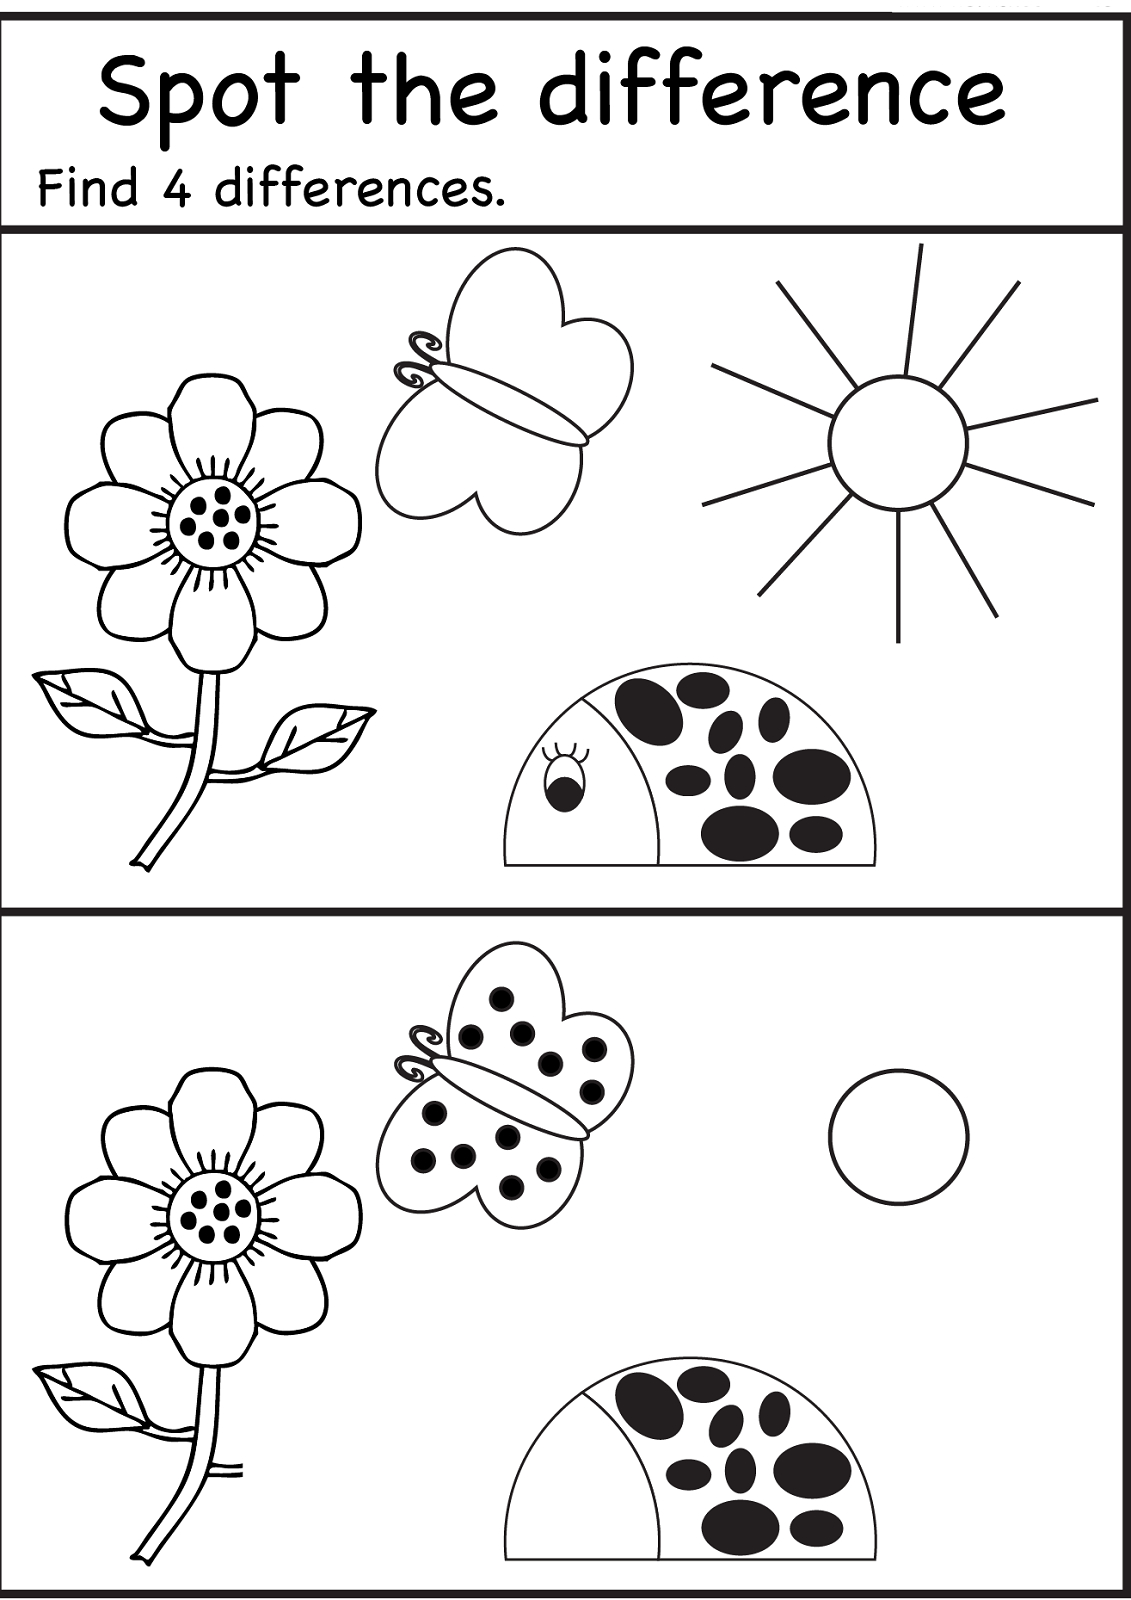 Spot The Difference Worksheets For Kids | Kids Worksheets Printable - Free Printable Spot The Difference For Kids